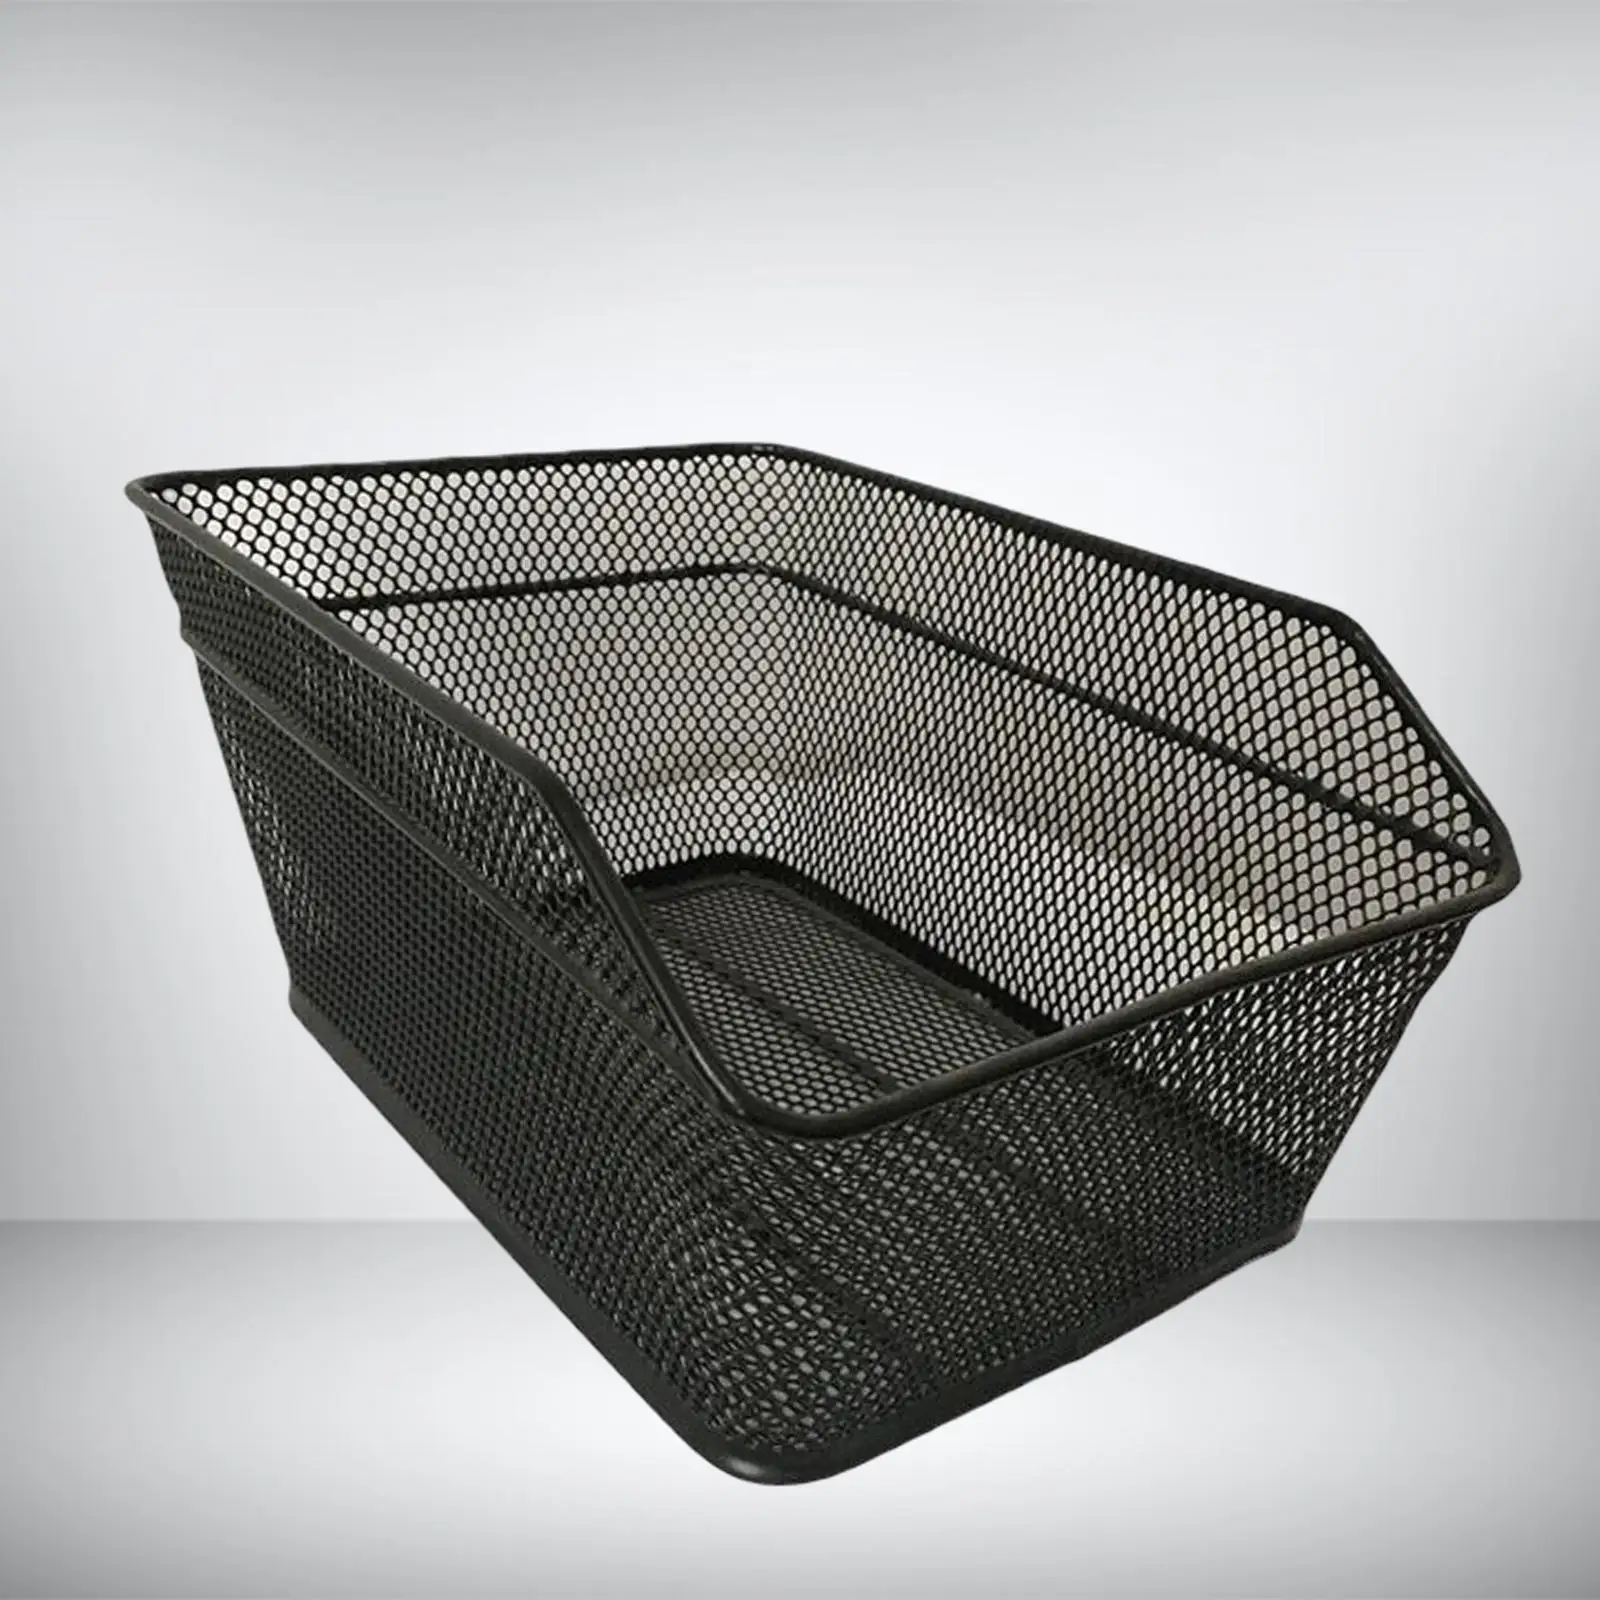 Universal Rear Bike Basket Parts Wear Resistant Detchable Sundries Container Rustproof Luggage Rack for Cargo Storage Outdoor